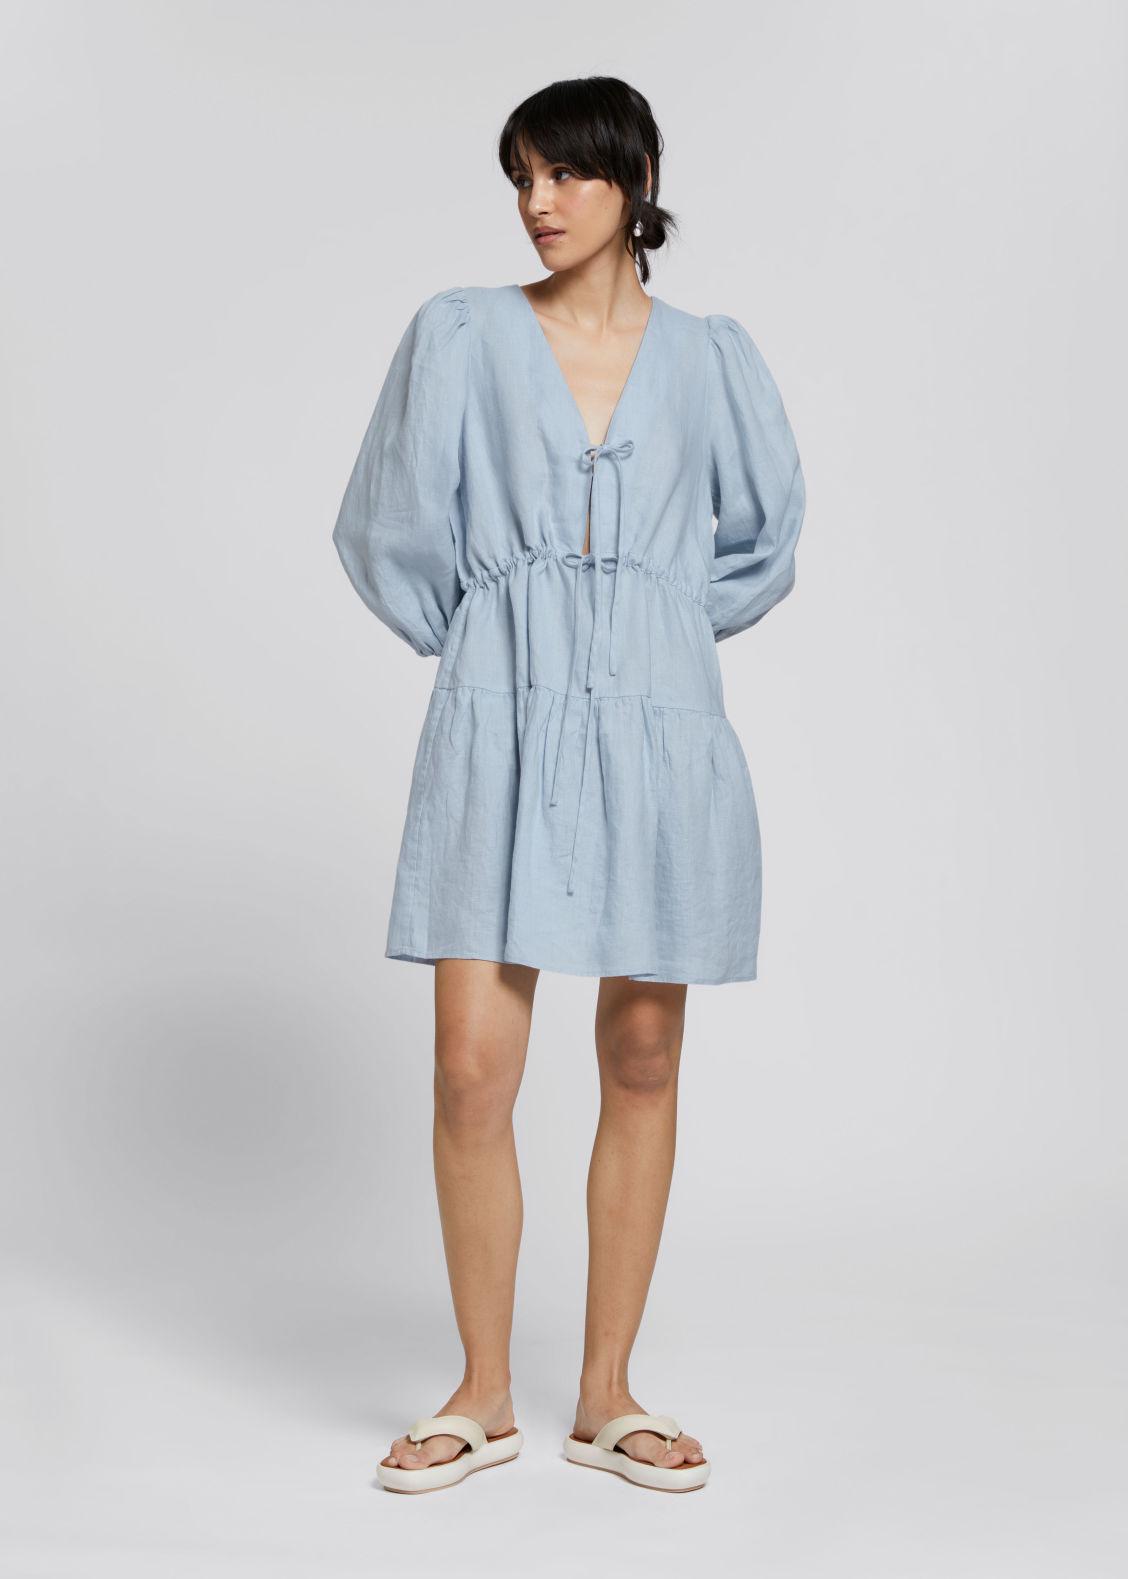 & Other Stories Tie-front Mini Dress in Blue | Lyst